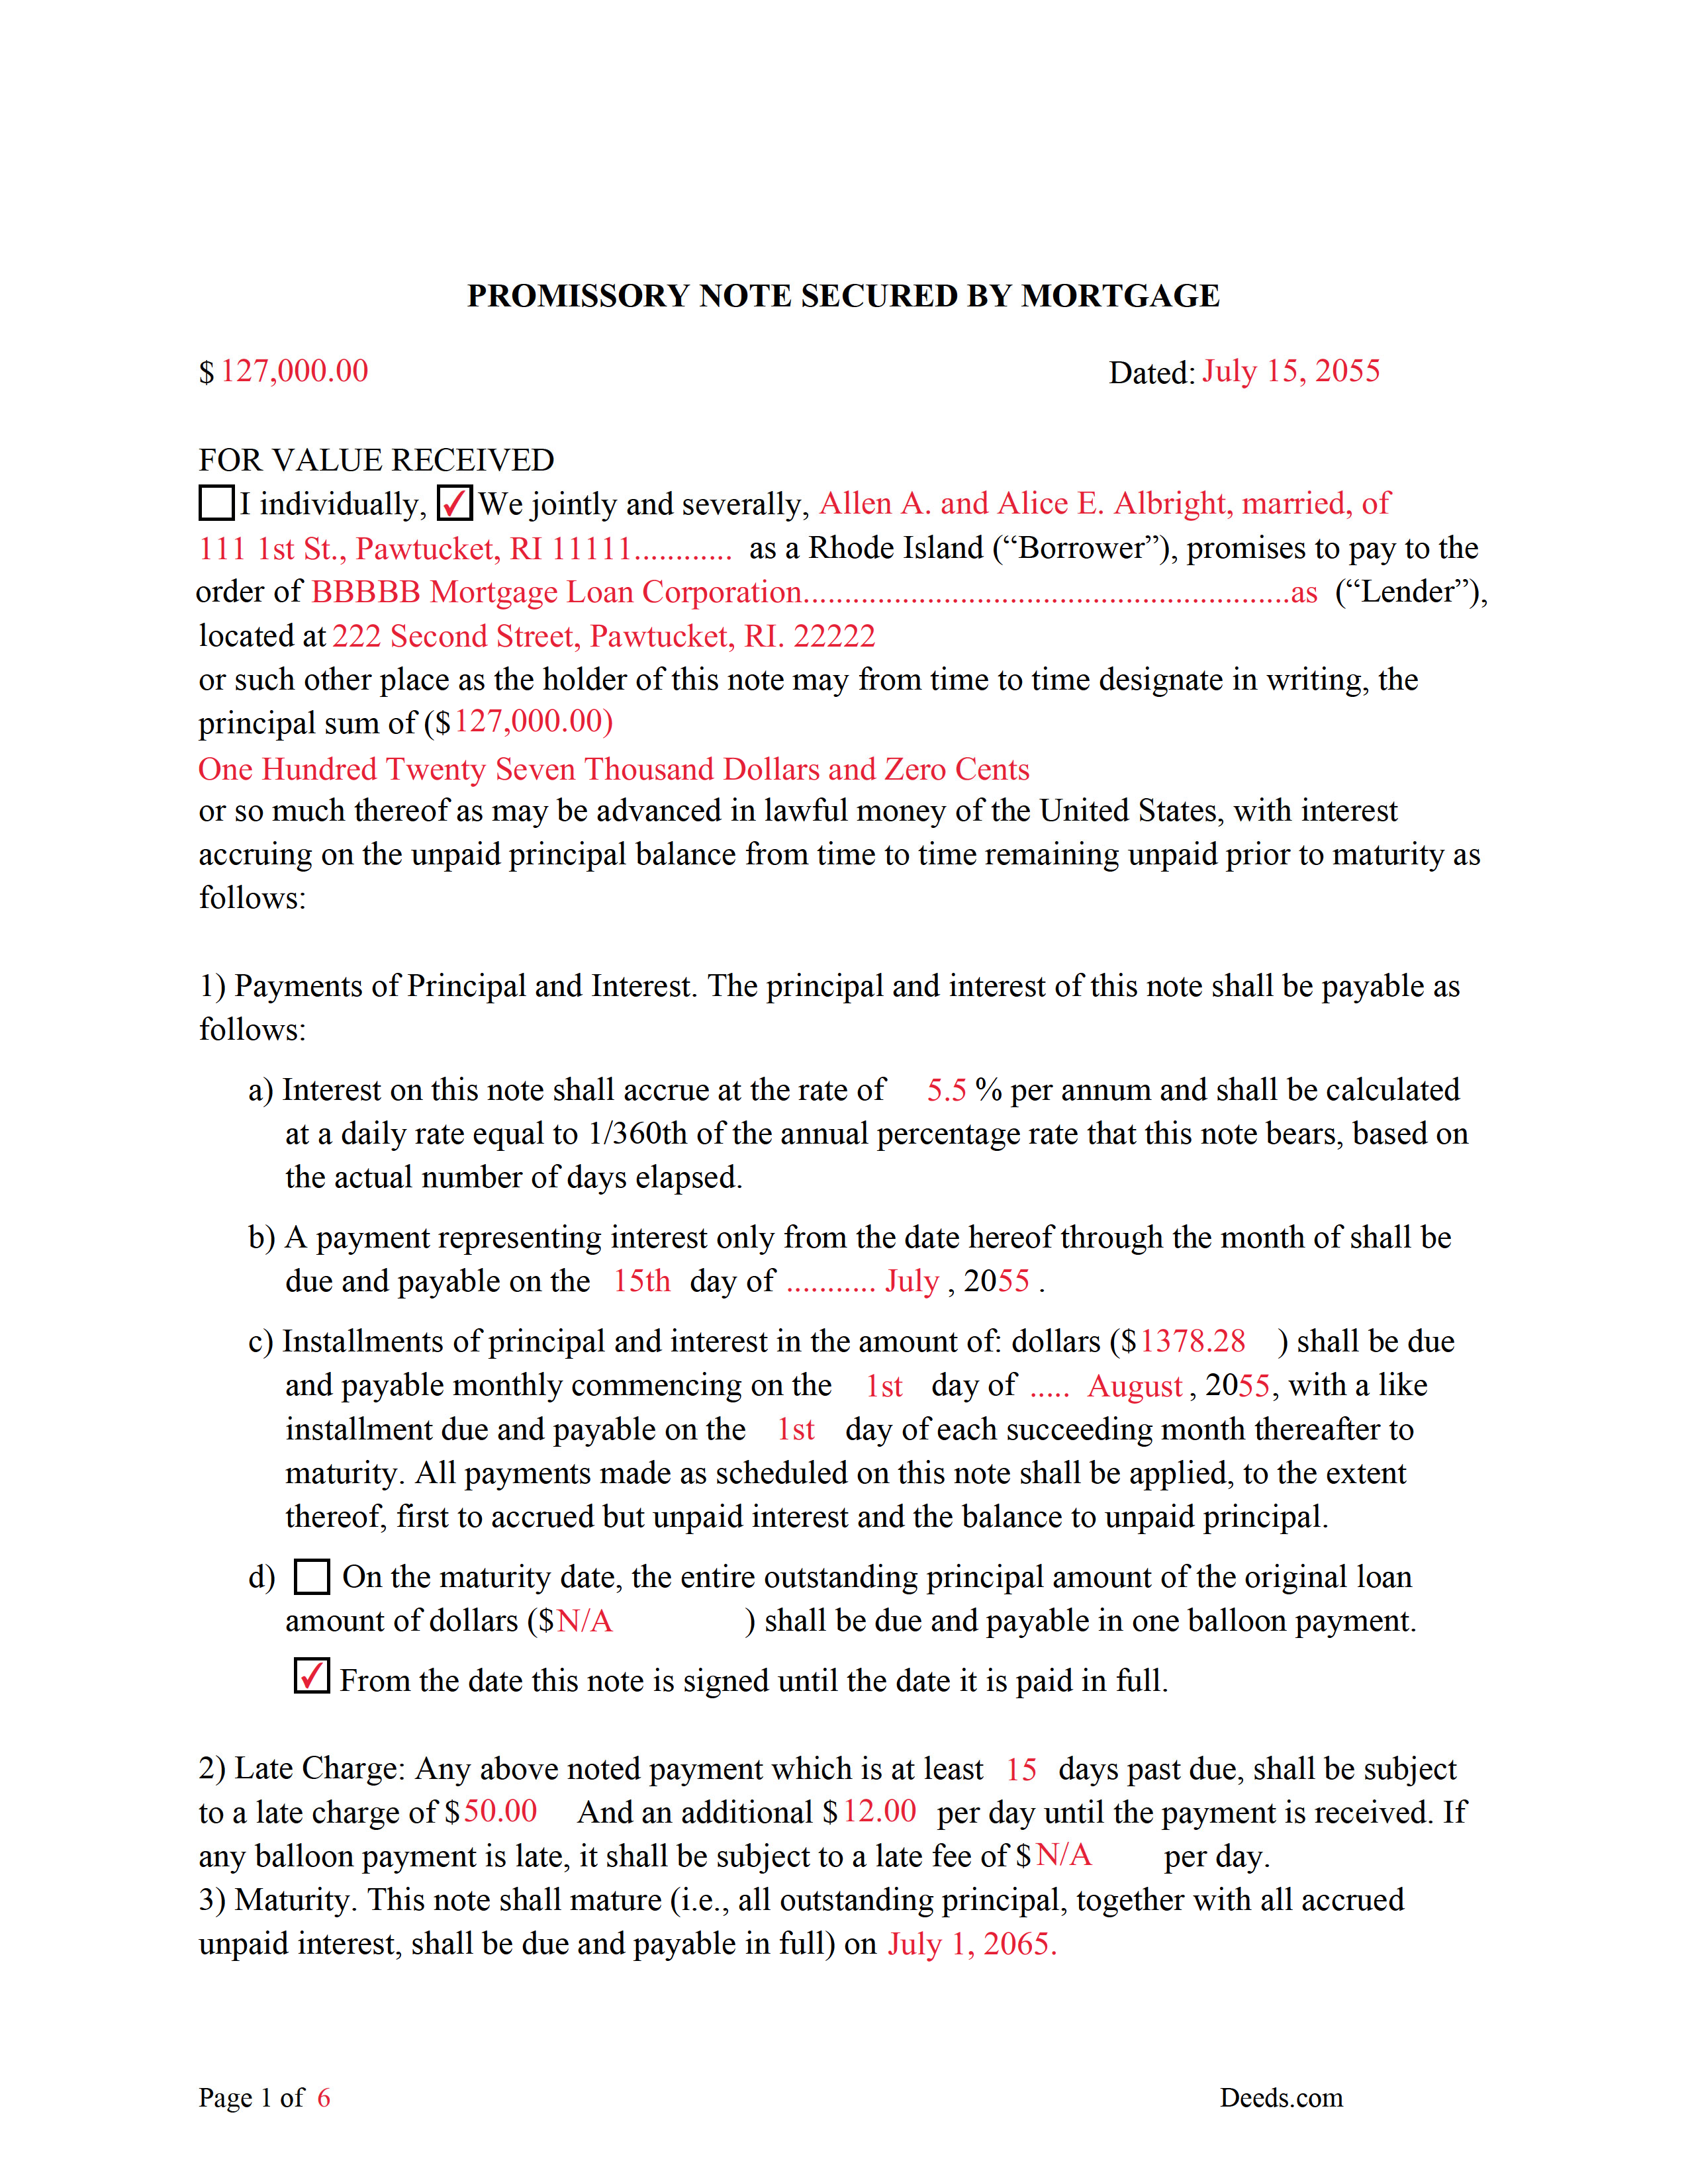 Completed Example of the Promissory Note Document